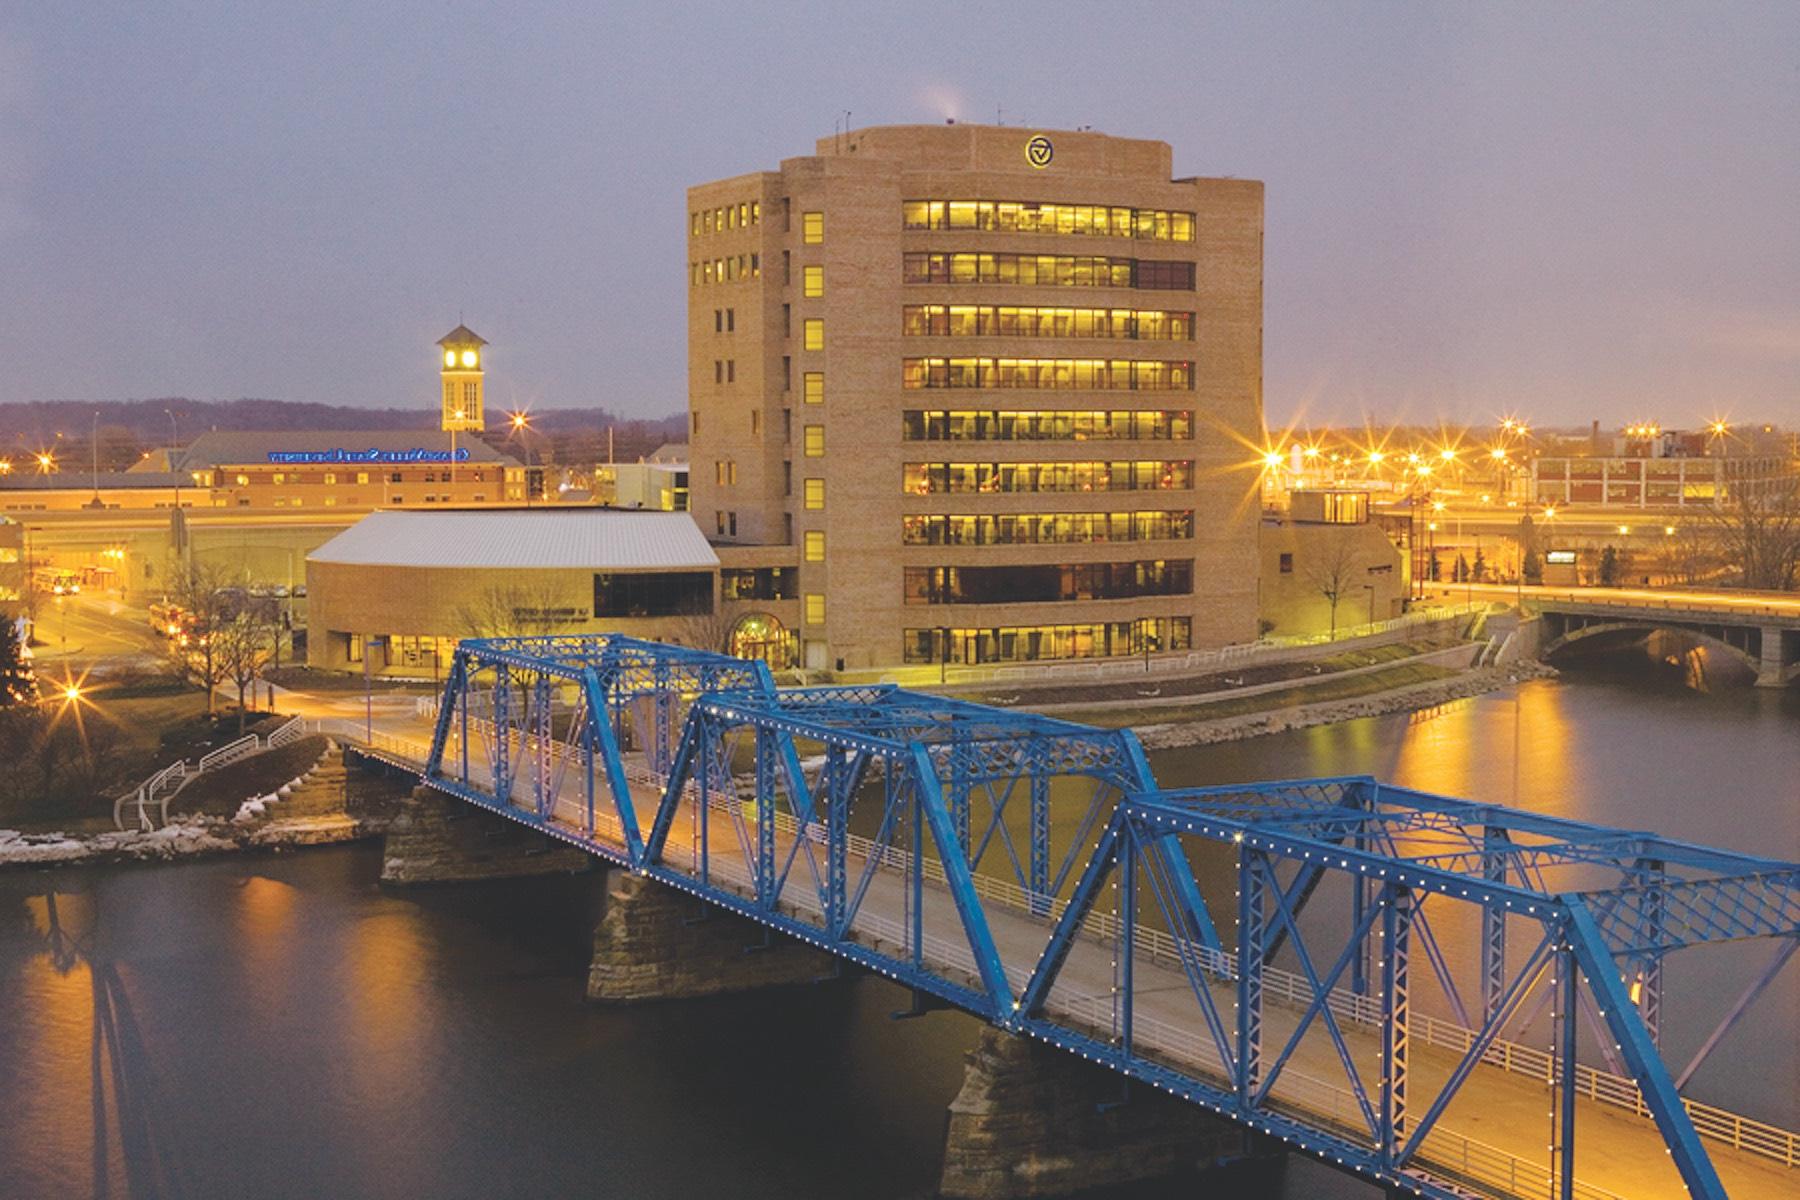 View of GVSU Pew campus from downtown Grand Rapids